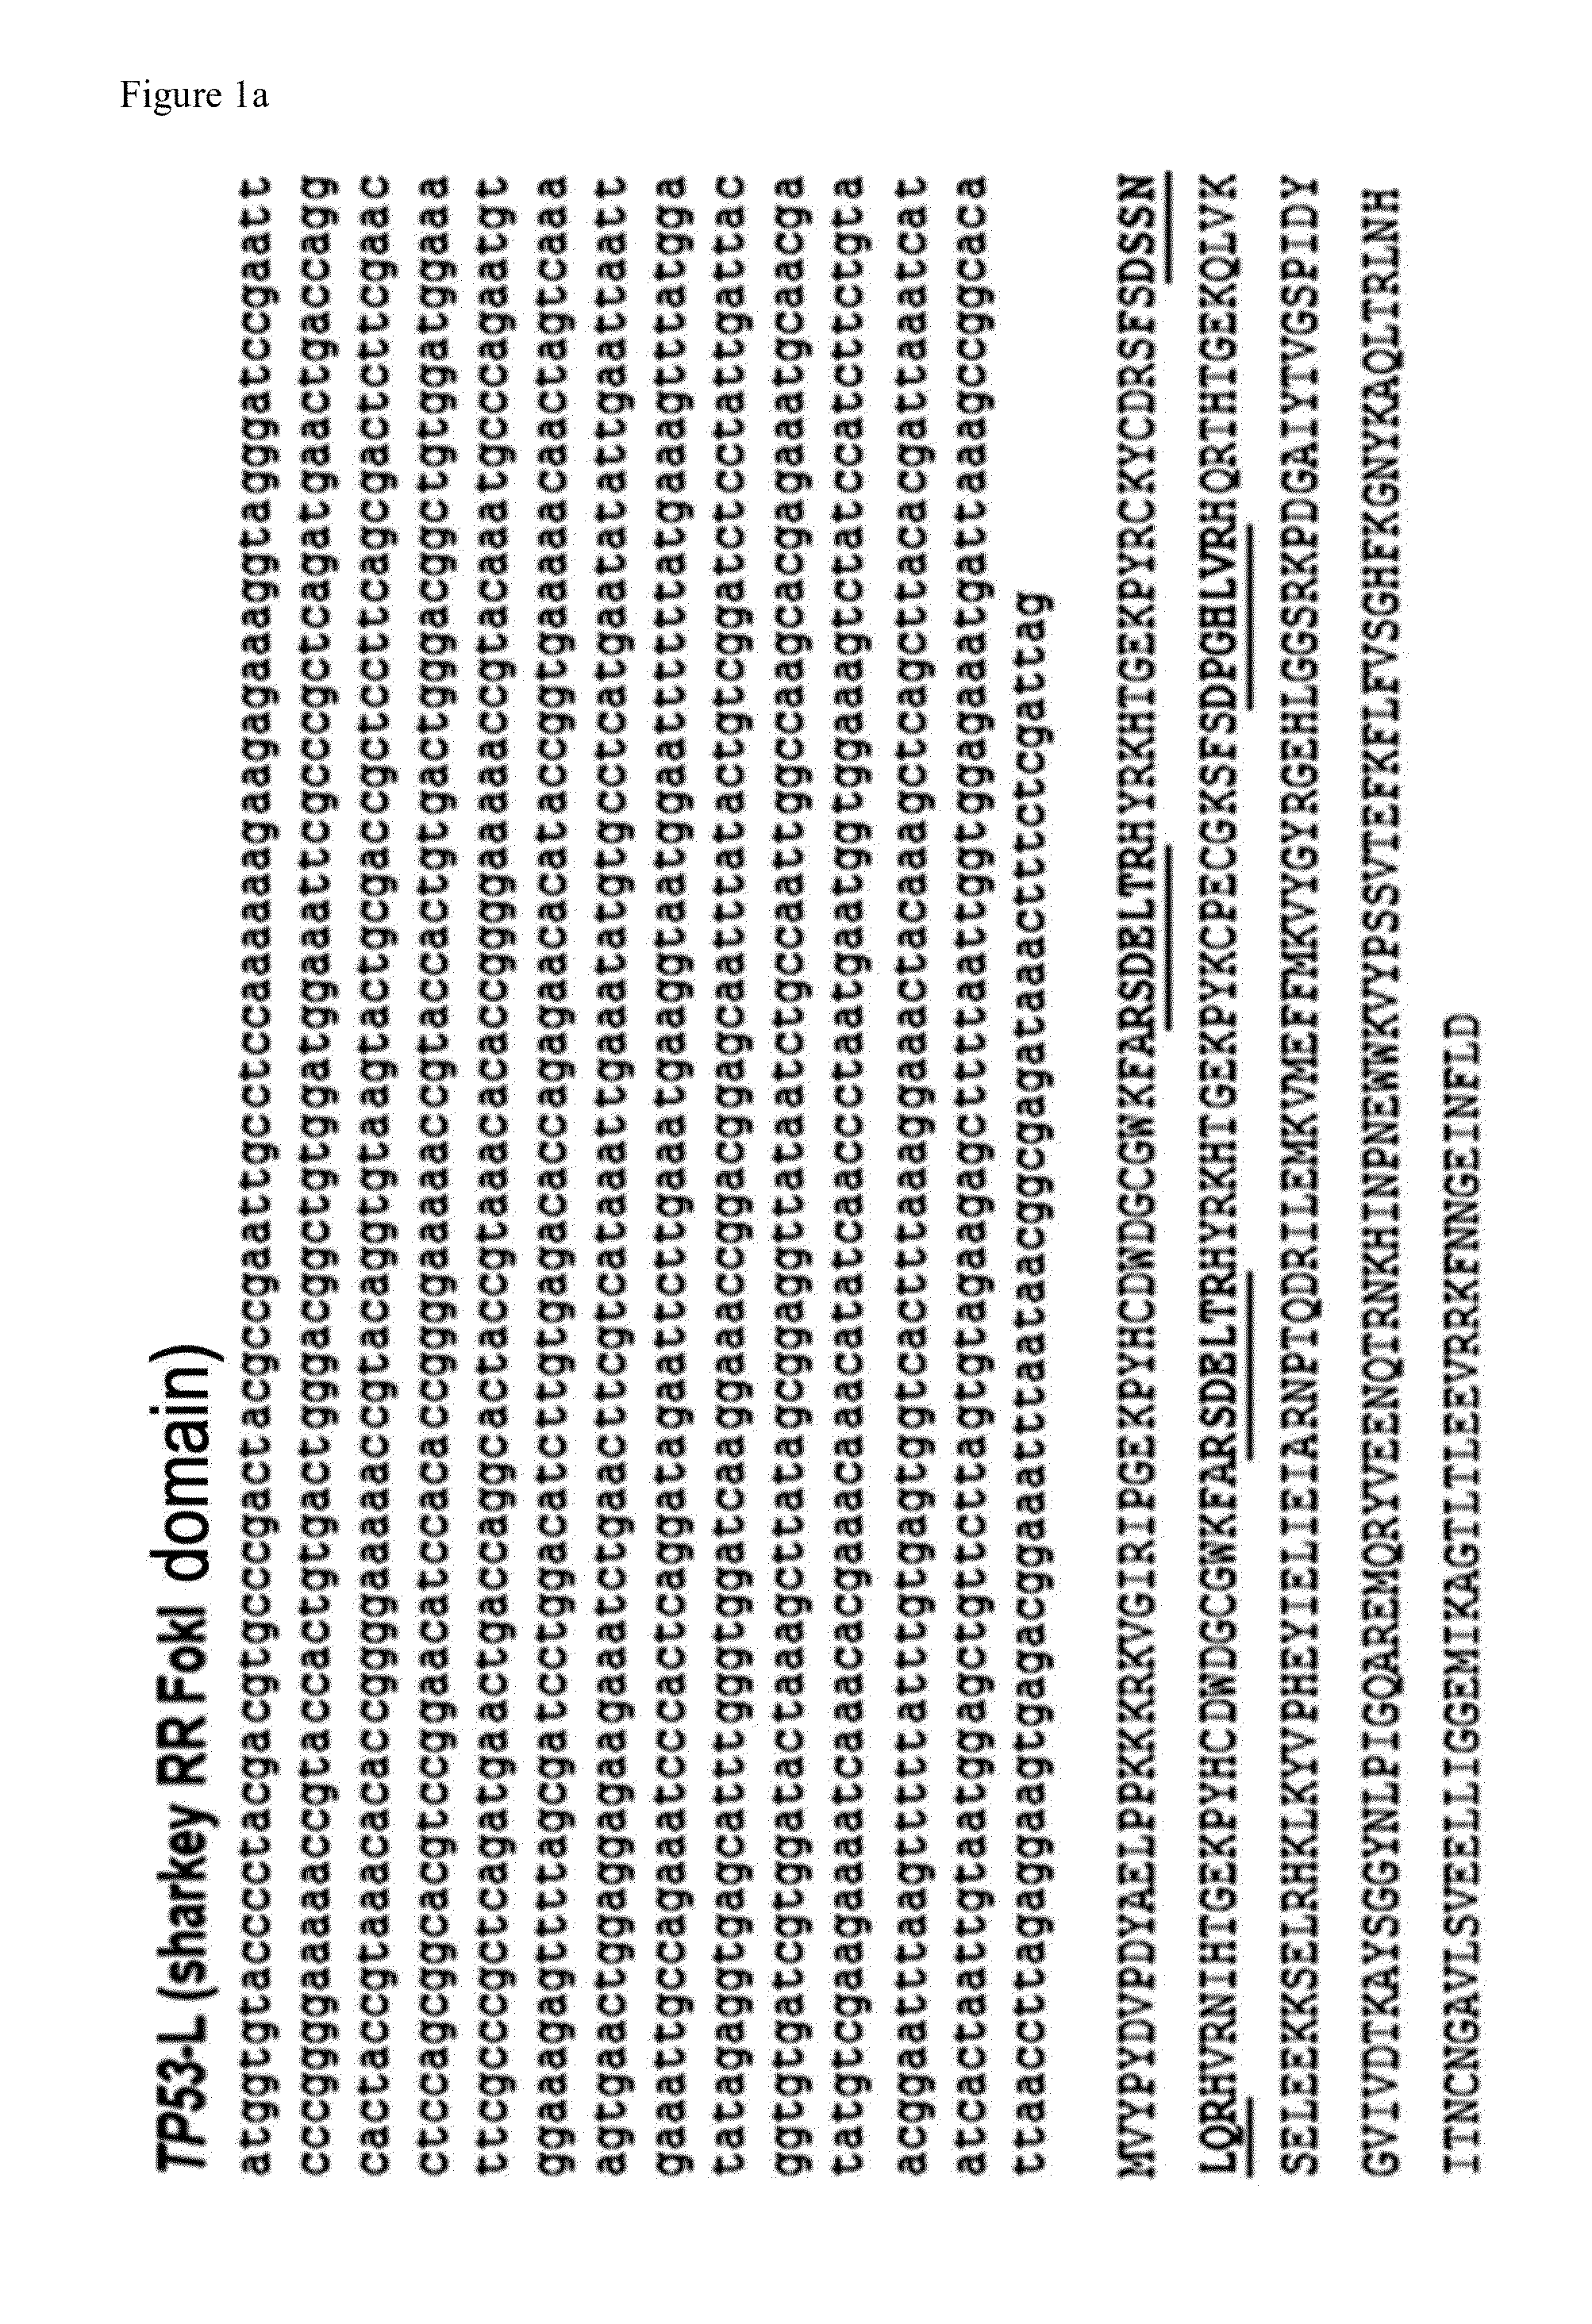 Method for concentrating cells that are genetically altered by nucleases